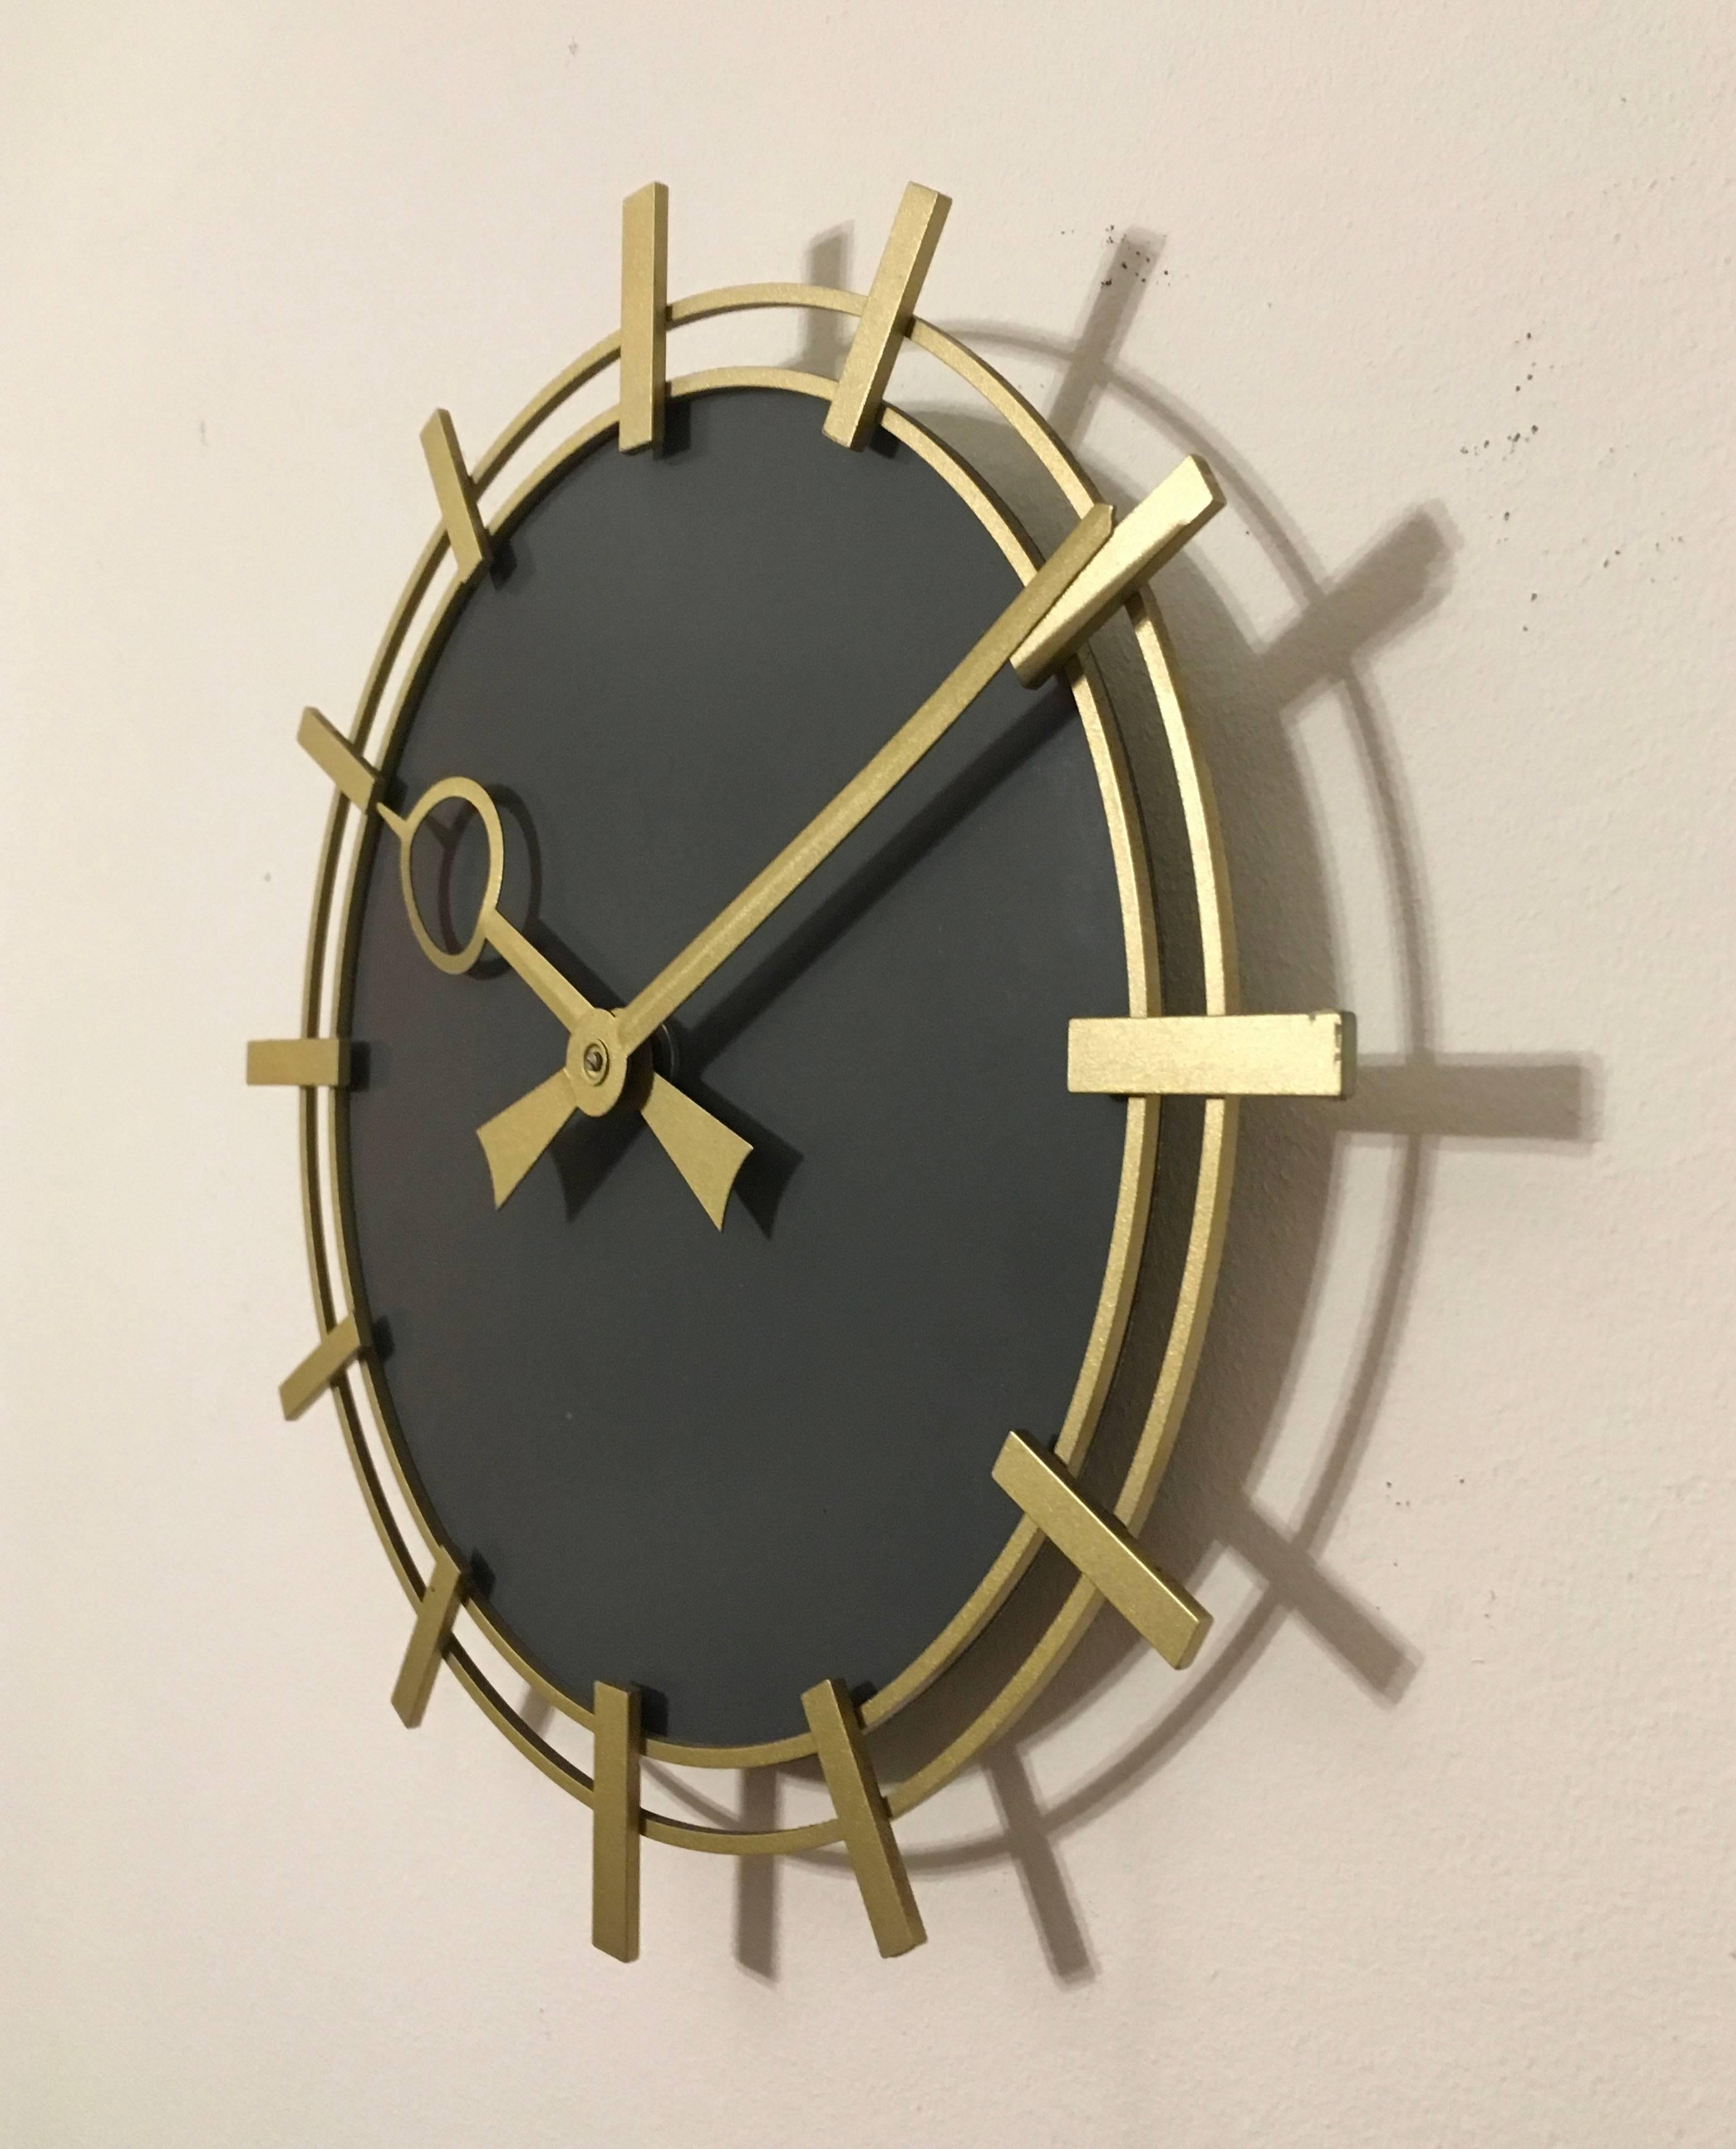 Brass frame with a painted clock face made in Germany in the 1970s.
Formerly a slave clock, it is now fitted with a modern quartz movement with a AA battery.